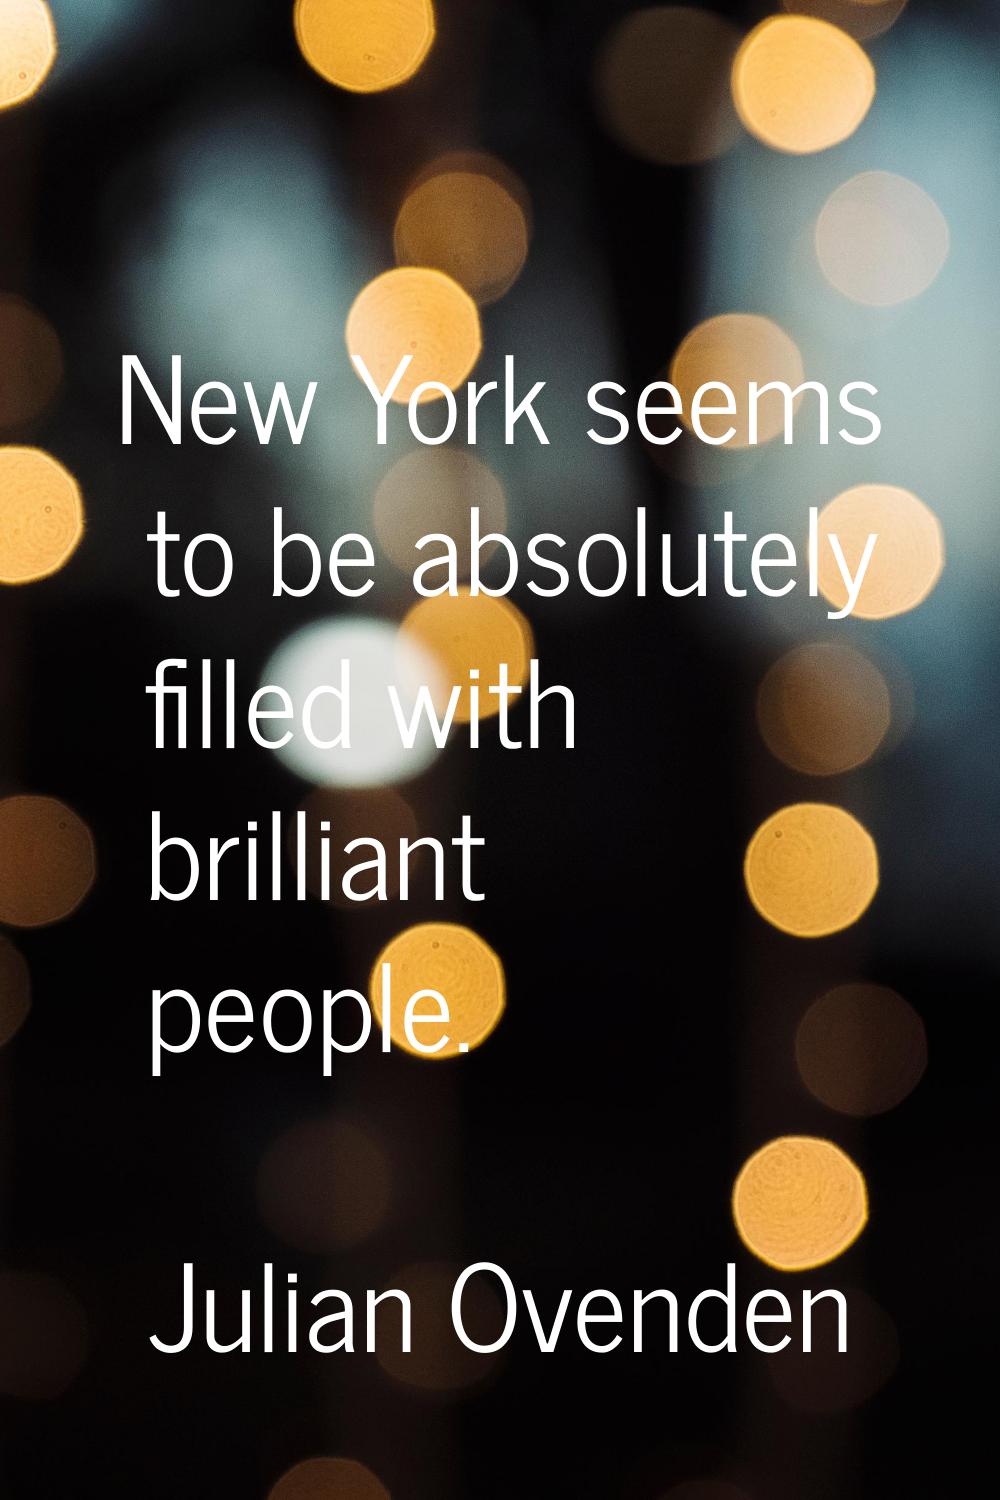 New York seems to be absolutely filled with brilliant people.